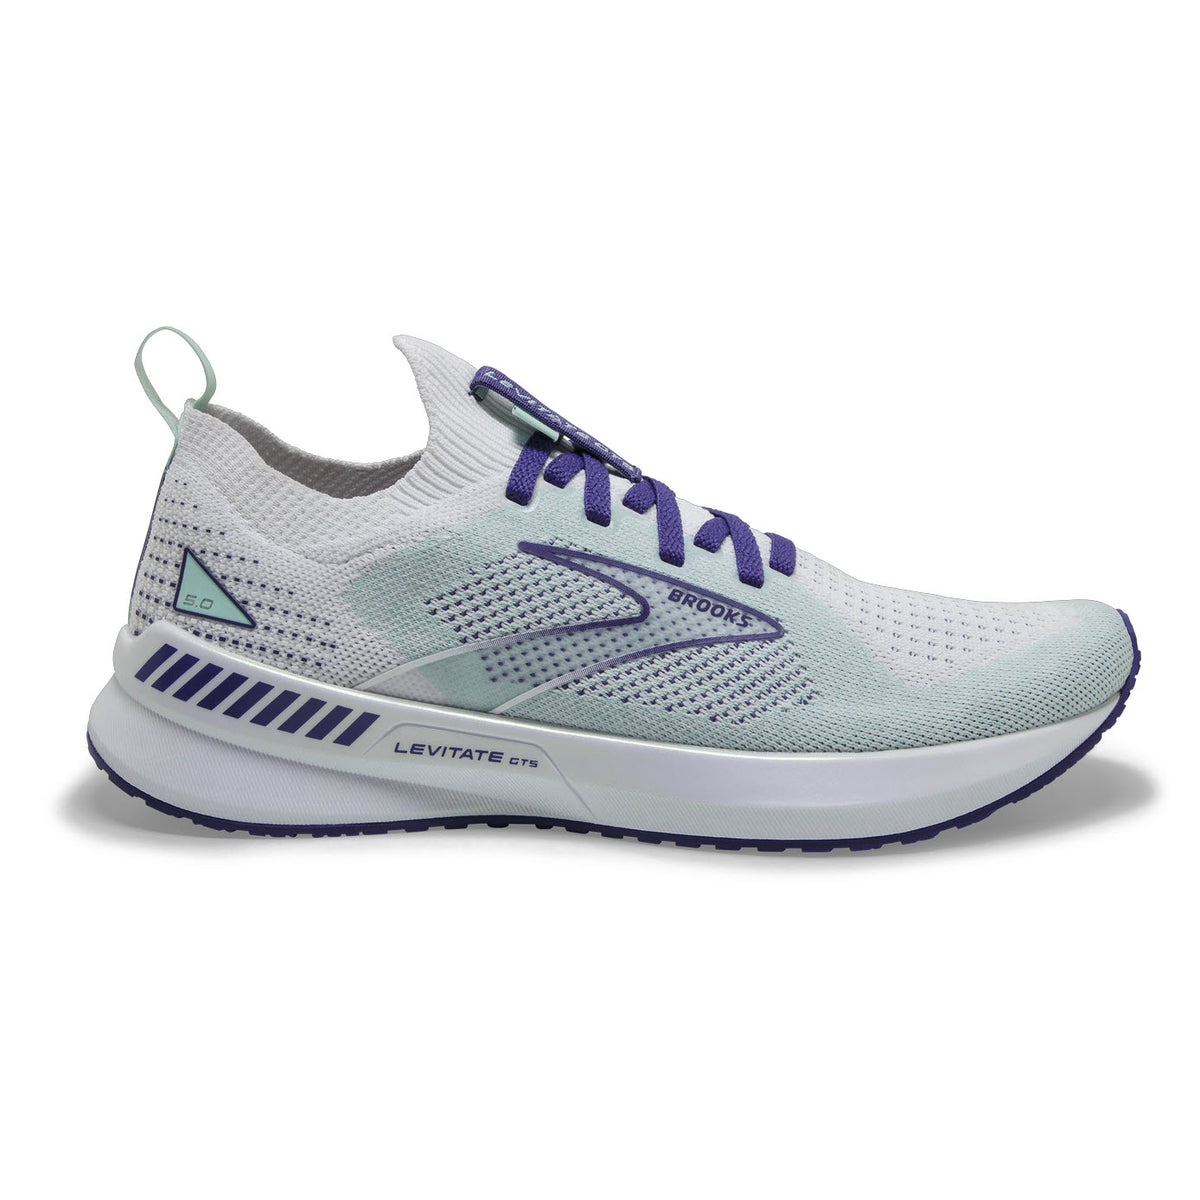 A single Brooks Levitate Stealthfit GTS 5 White/Navy running shoe with purple laces on a white background.